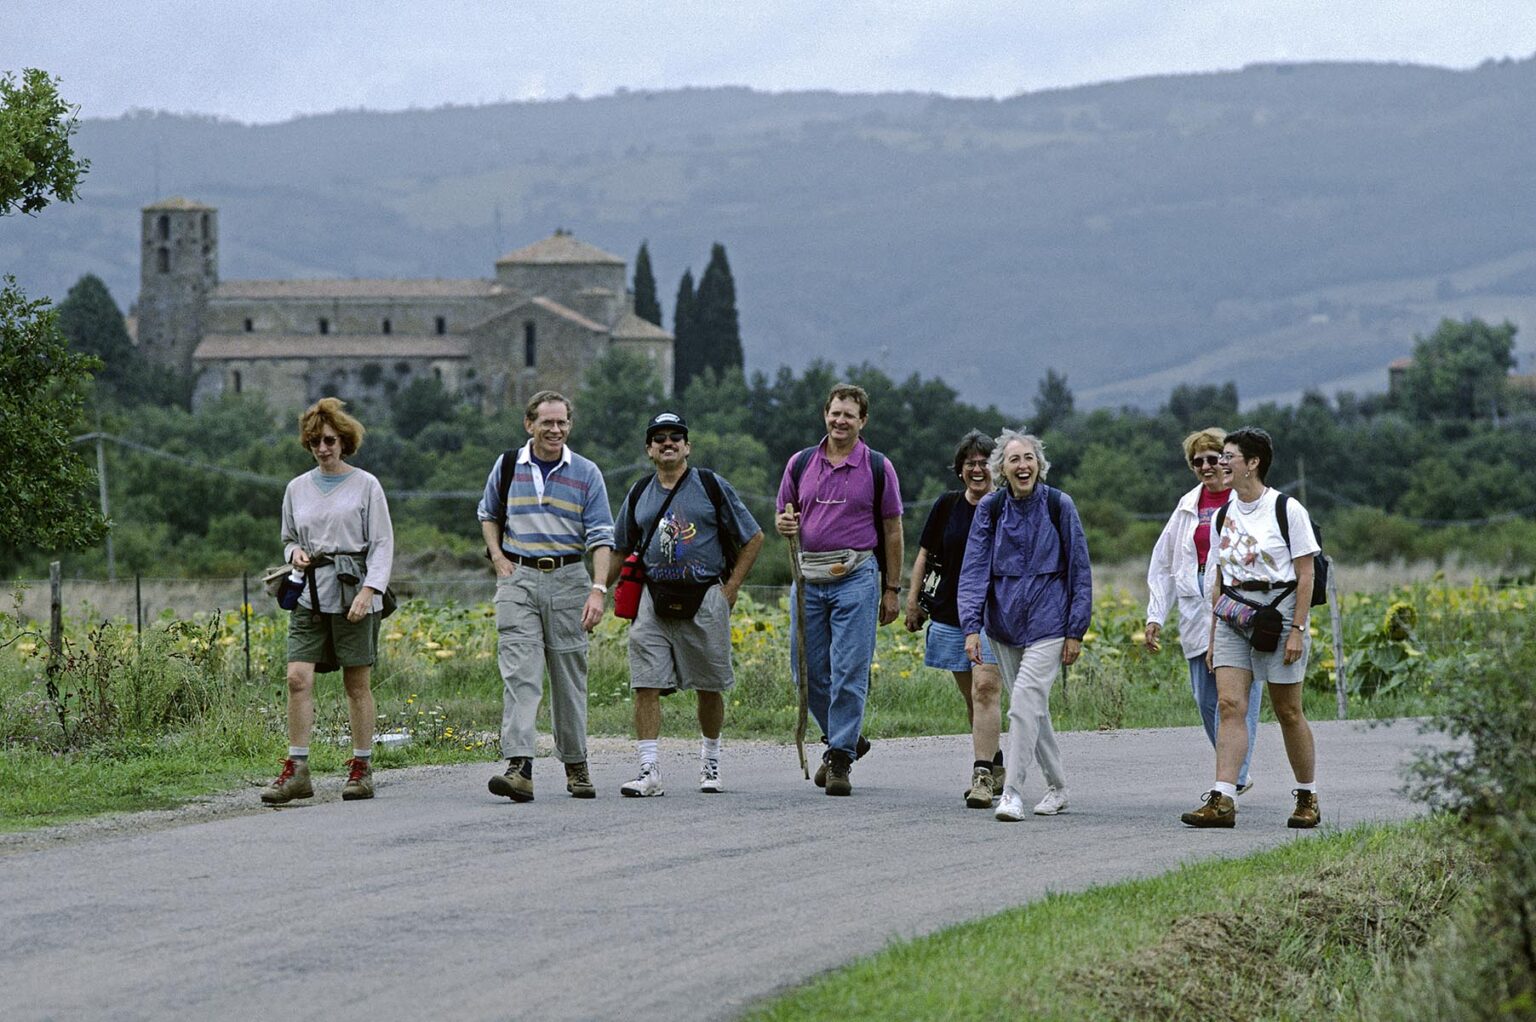 Hikers on a country road head for the town of SORANO - TUSCANY, ITALY